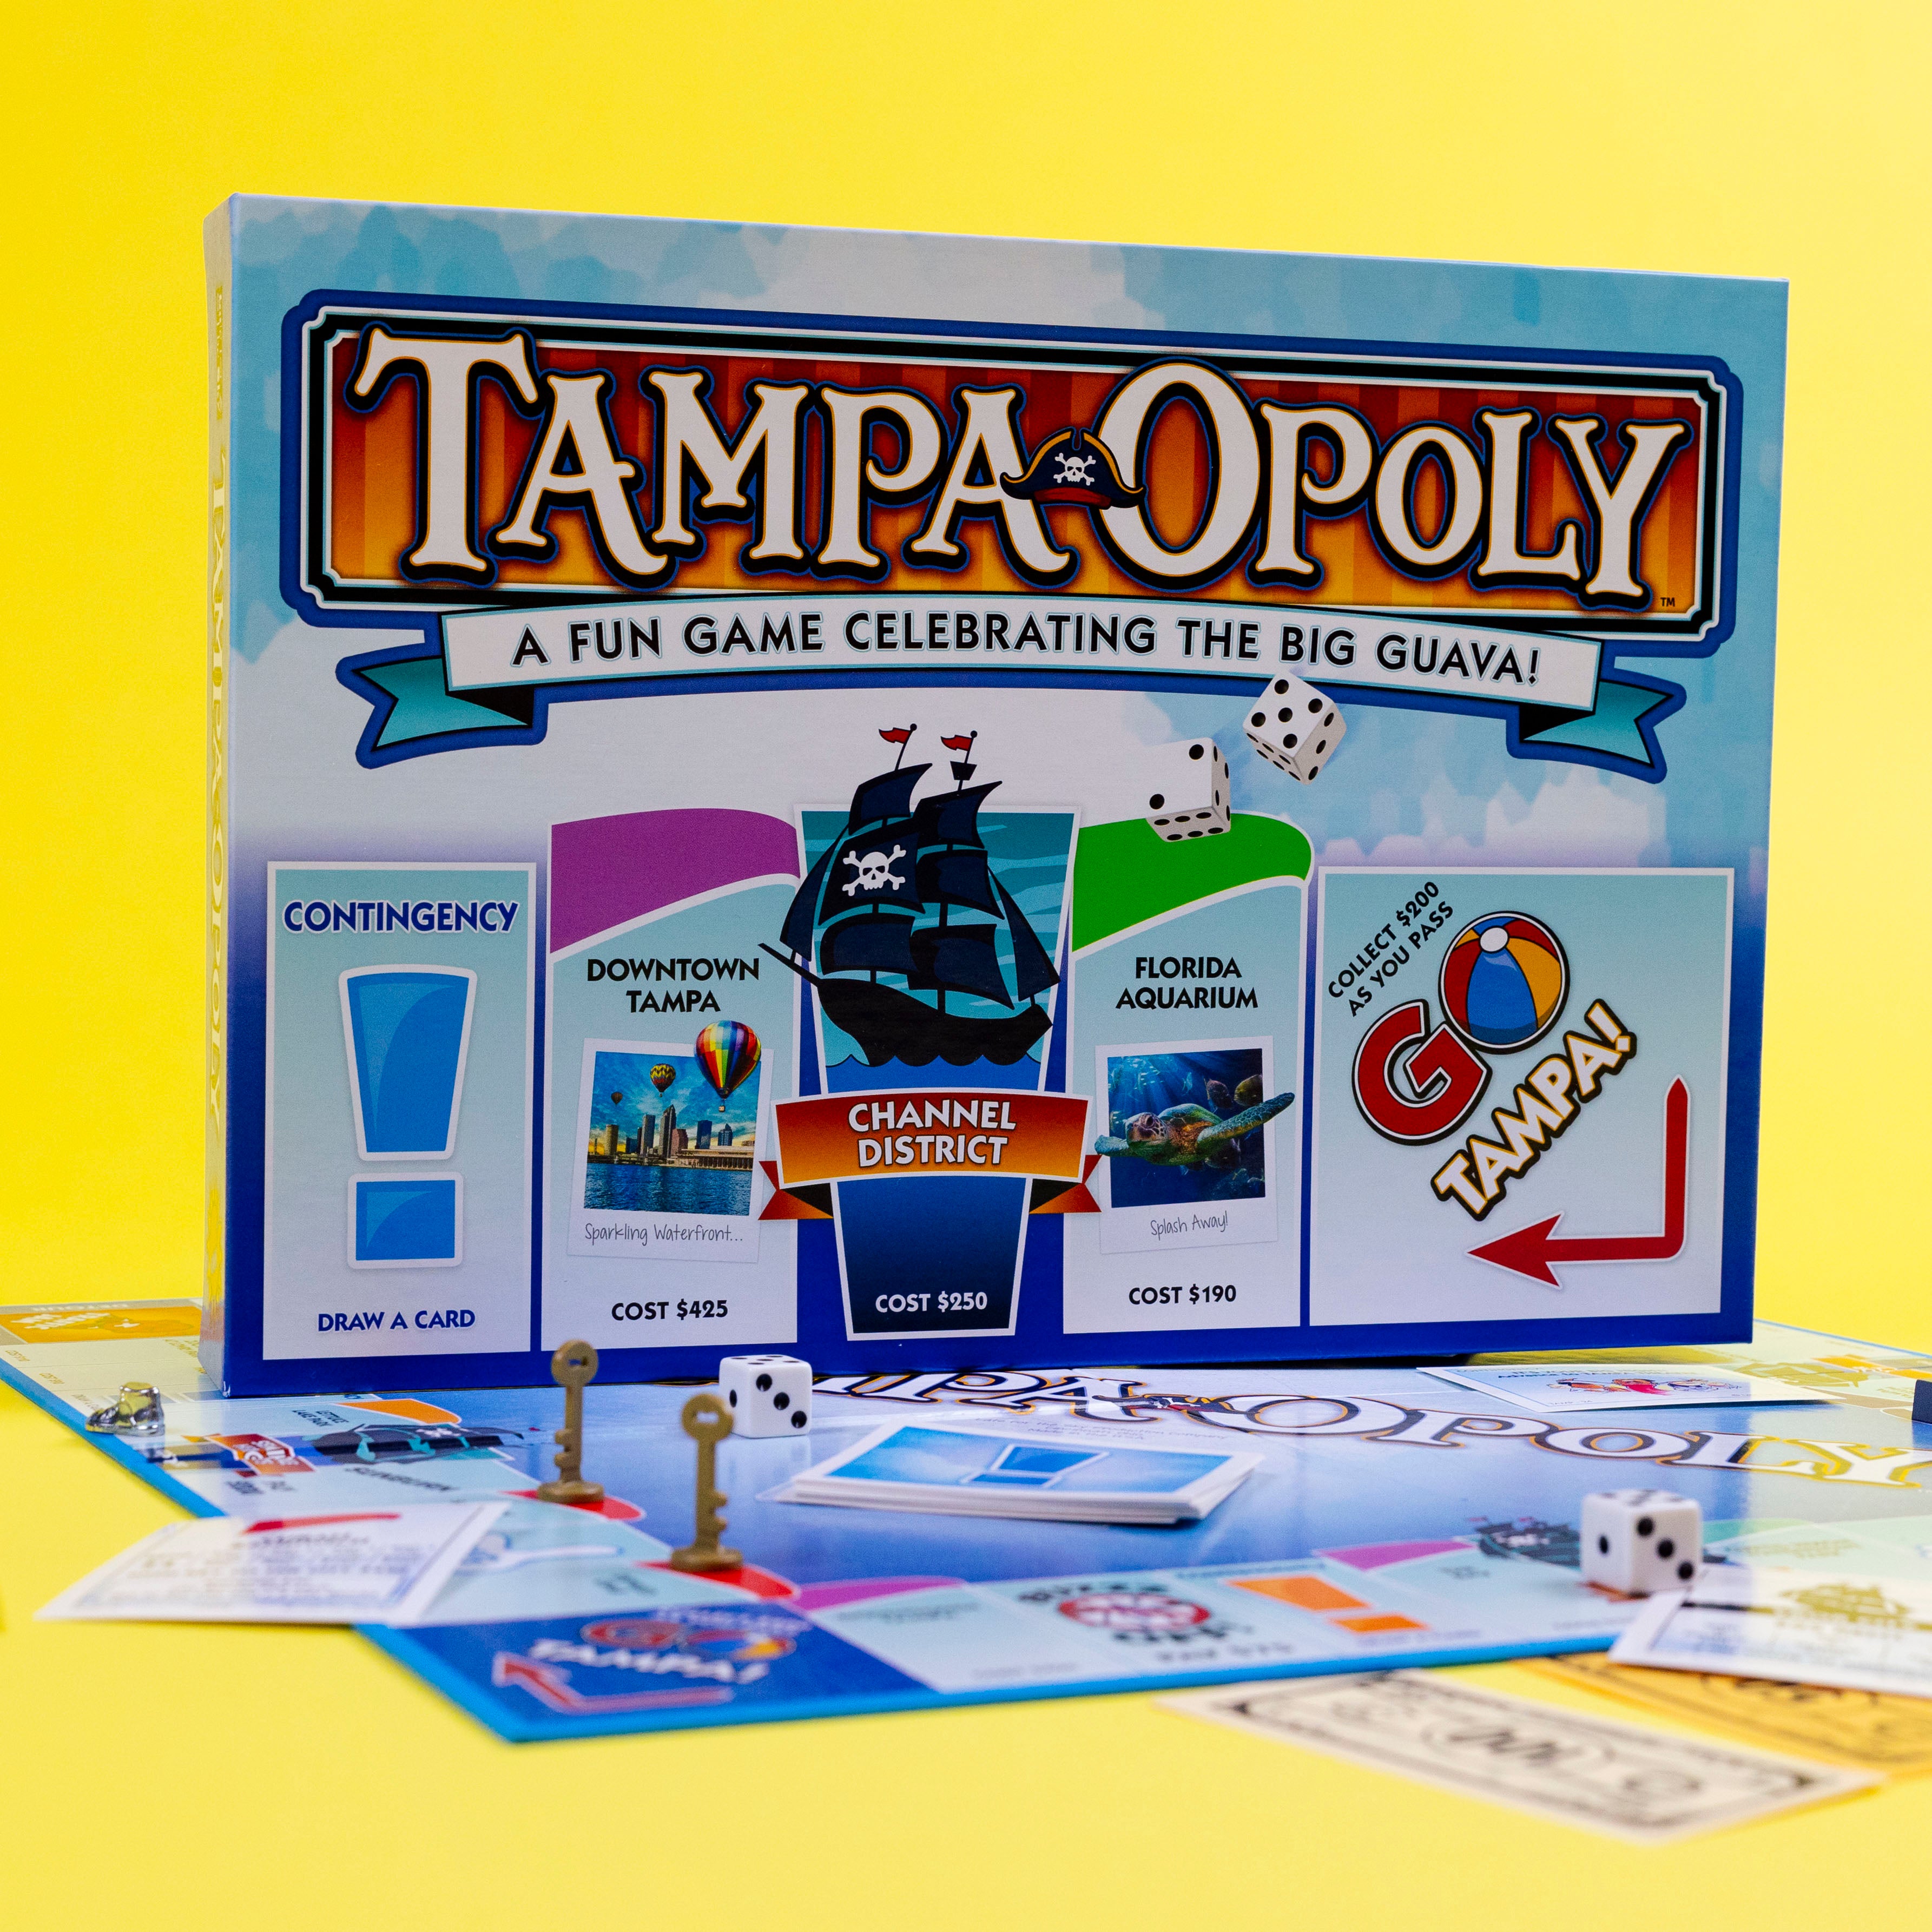 Tampa-Opoly Board Game